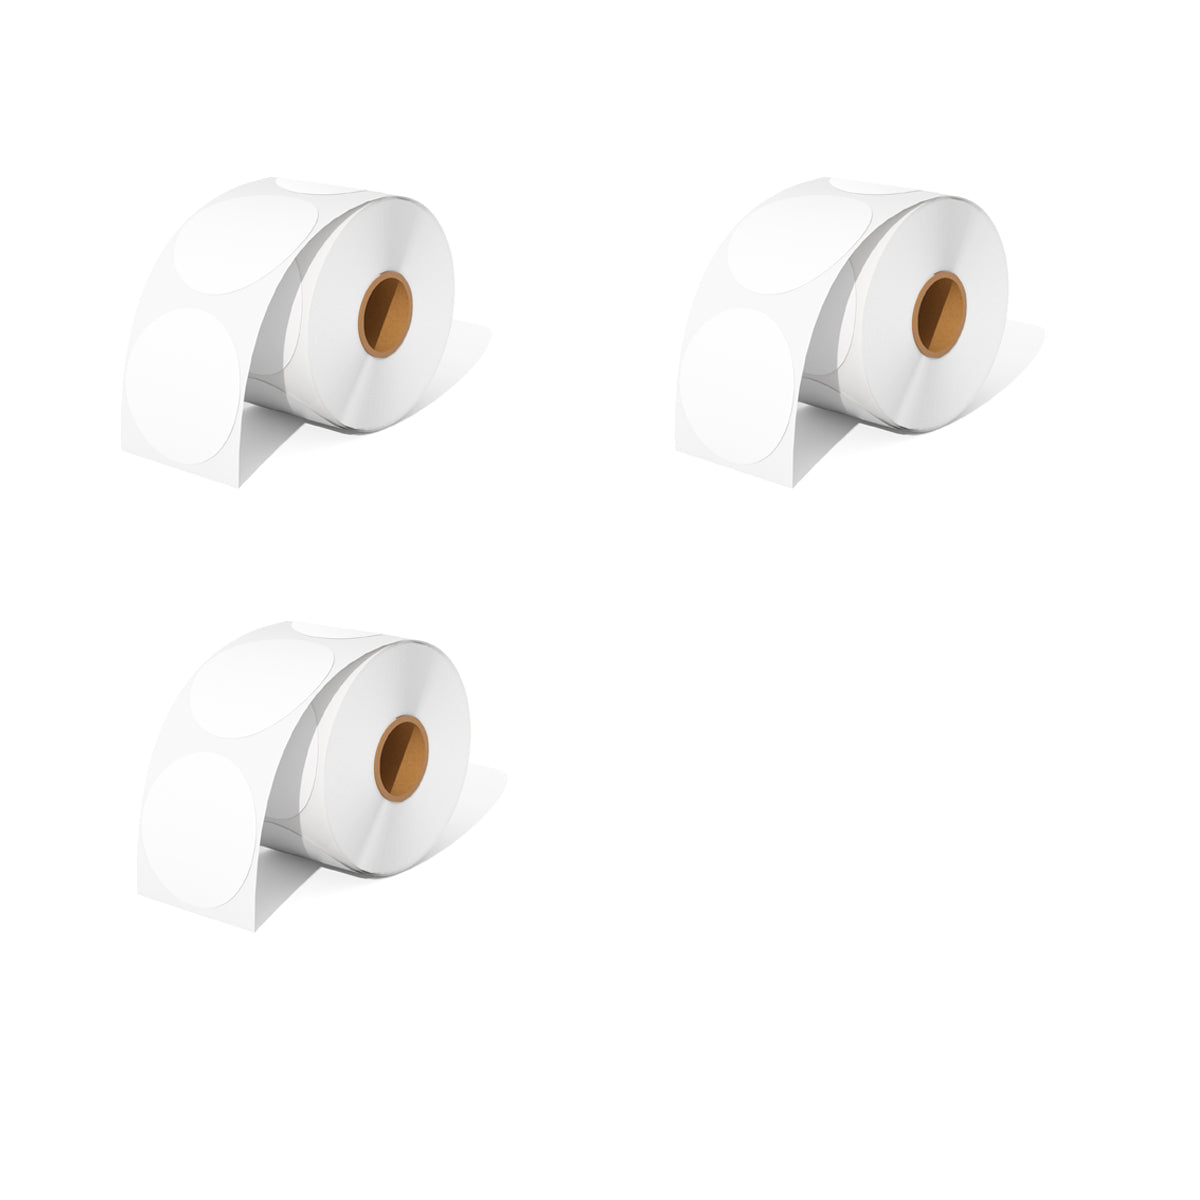 We offer three rolls of white direct thermal round labels as a kit, with 750 labels per roll.